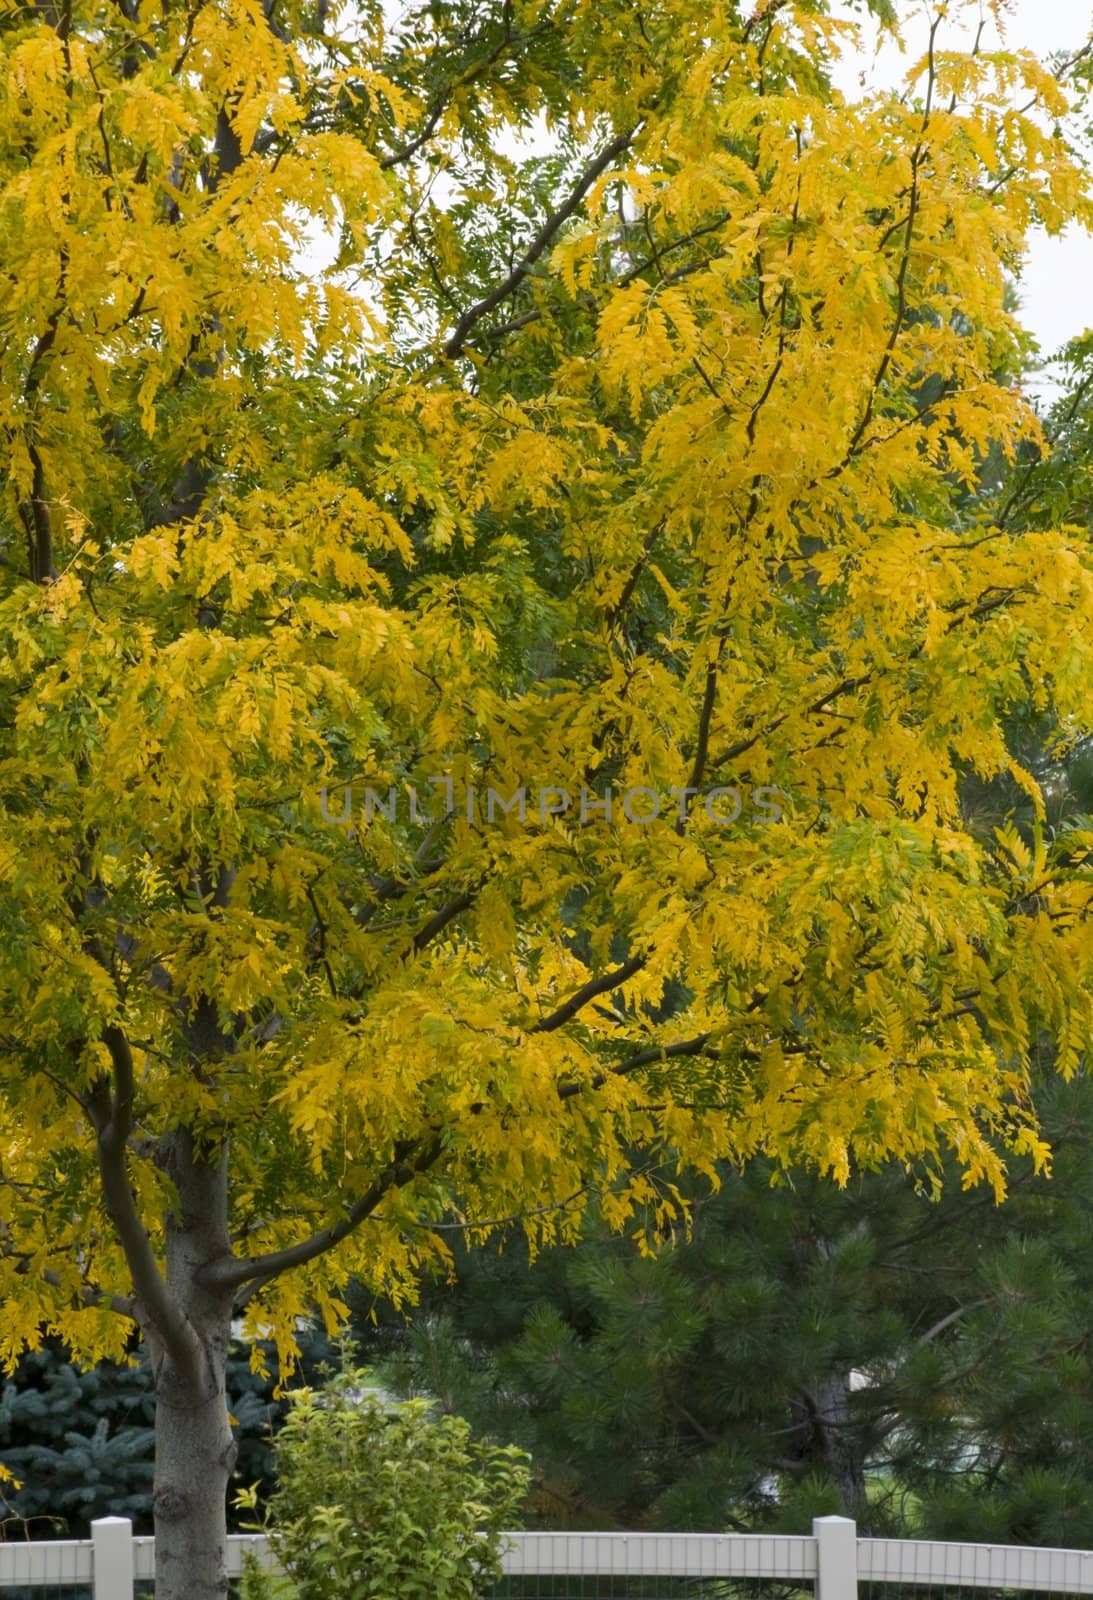 Yellow leaves in autumn by rcarner